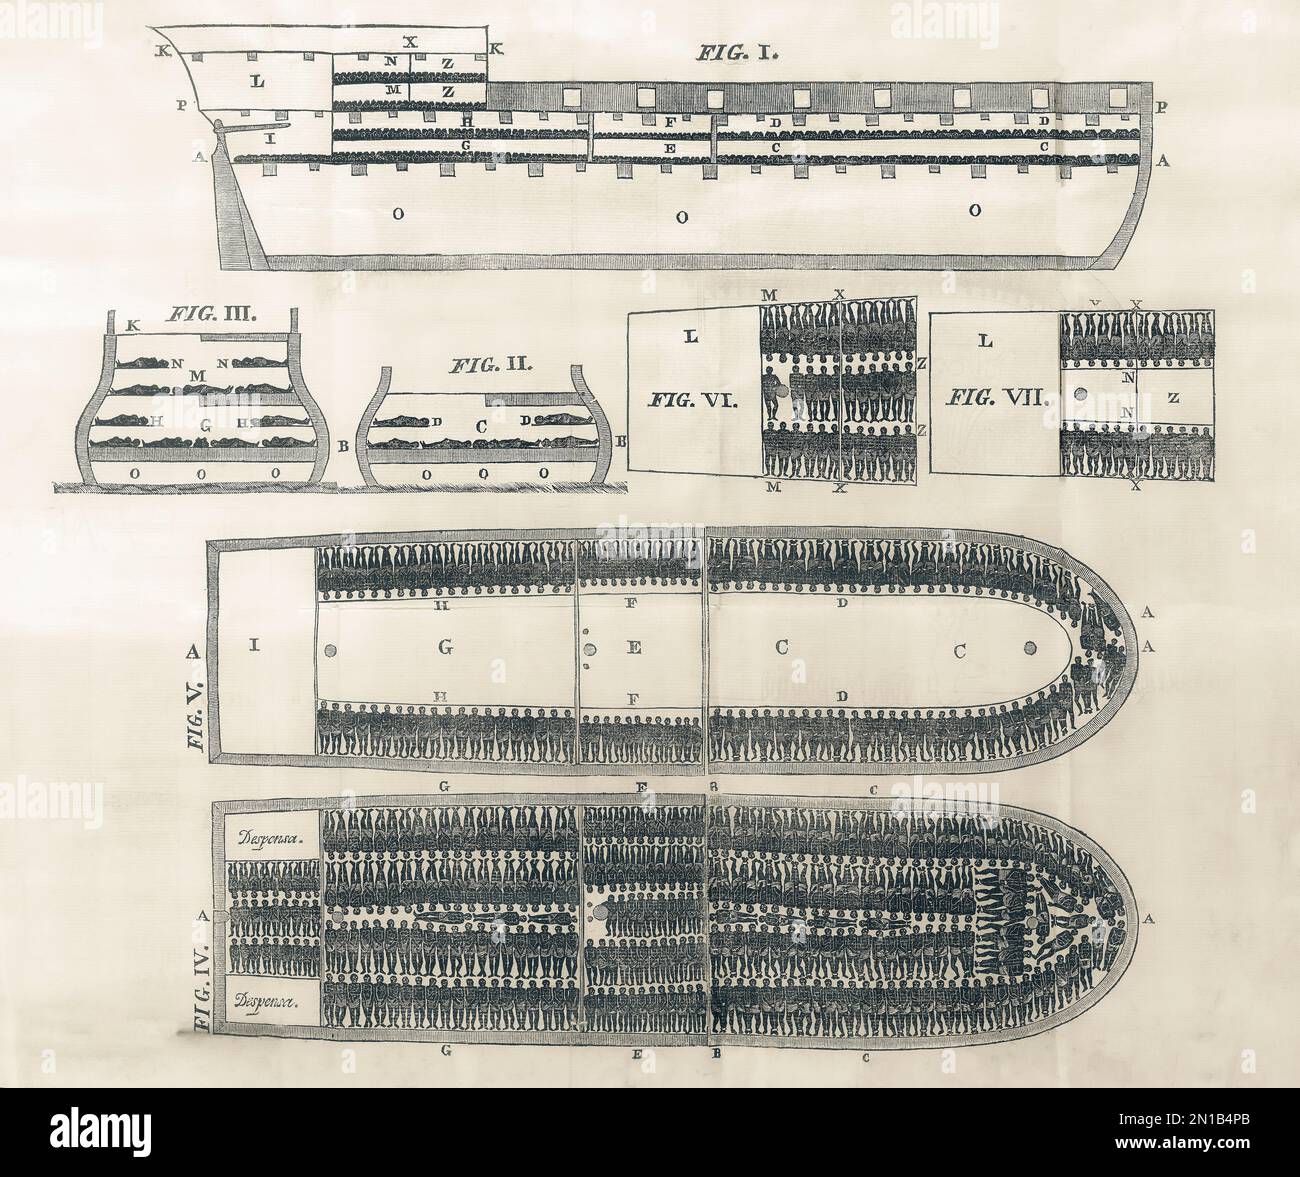 Plan of the decks of a slave ship showing the inhumane conditions used to transport slaves across the Atlantic.  After a 19th century illustration. Stock Photo